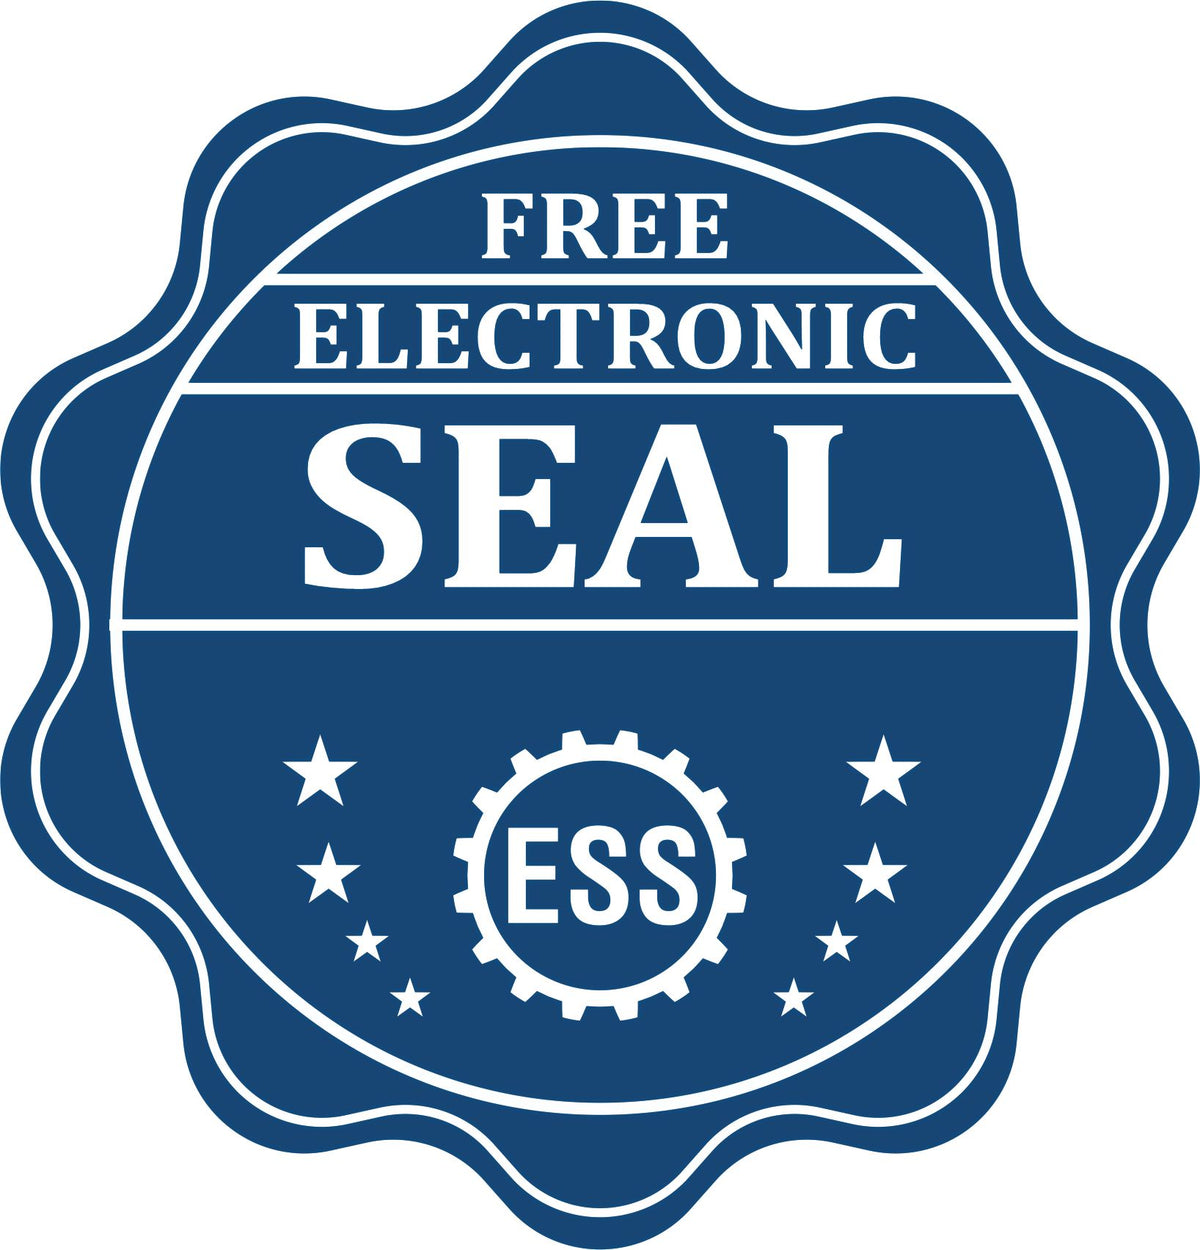 A badge showing a free electronic seal for the Heavy Duty Cast Iron Hawaii Geologist Seal Embosser with stars and the ESS gear on the emblem.